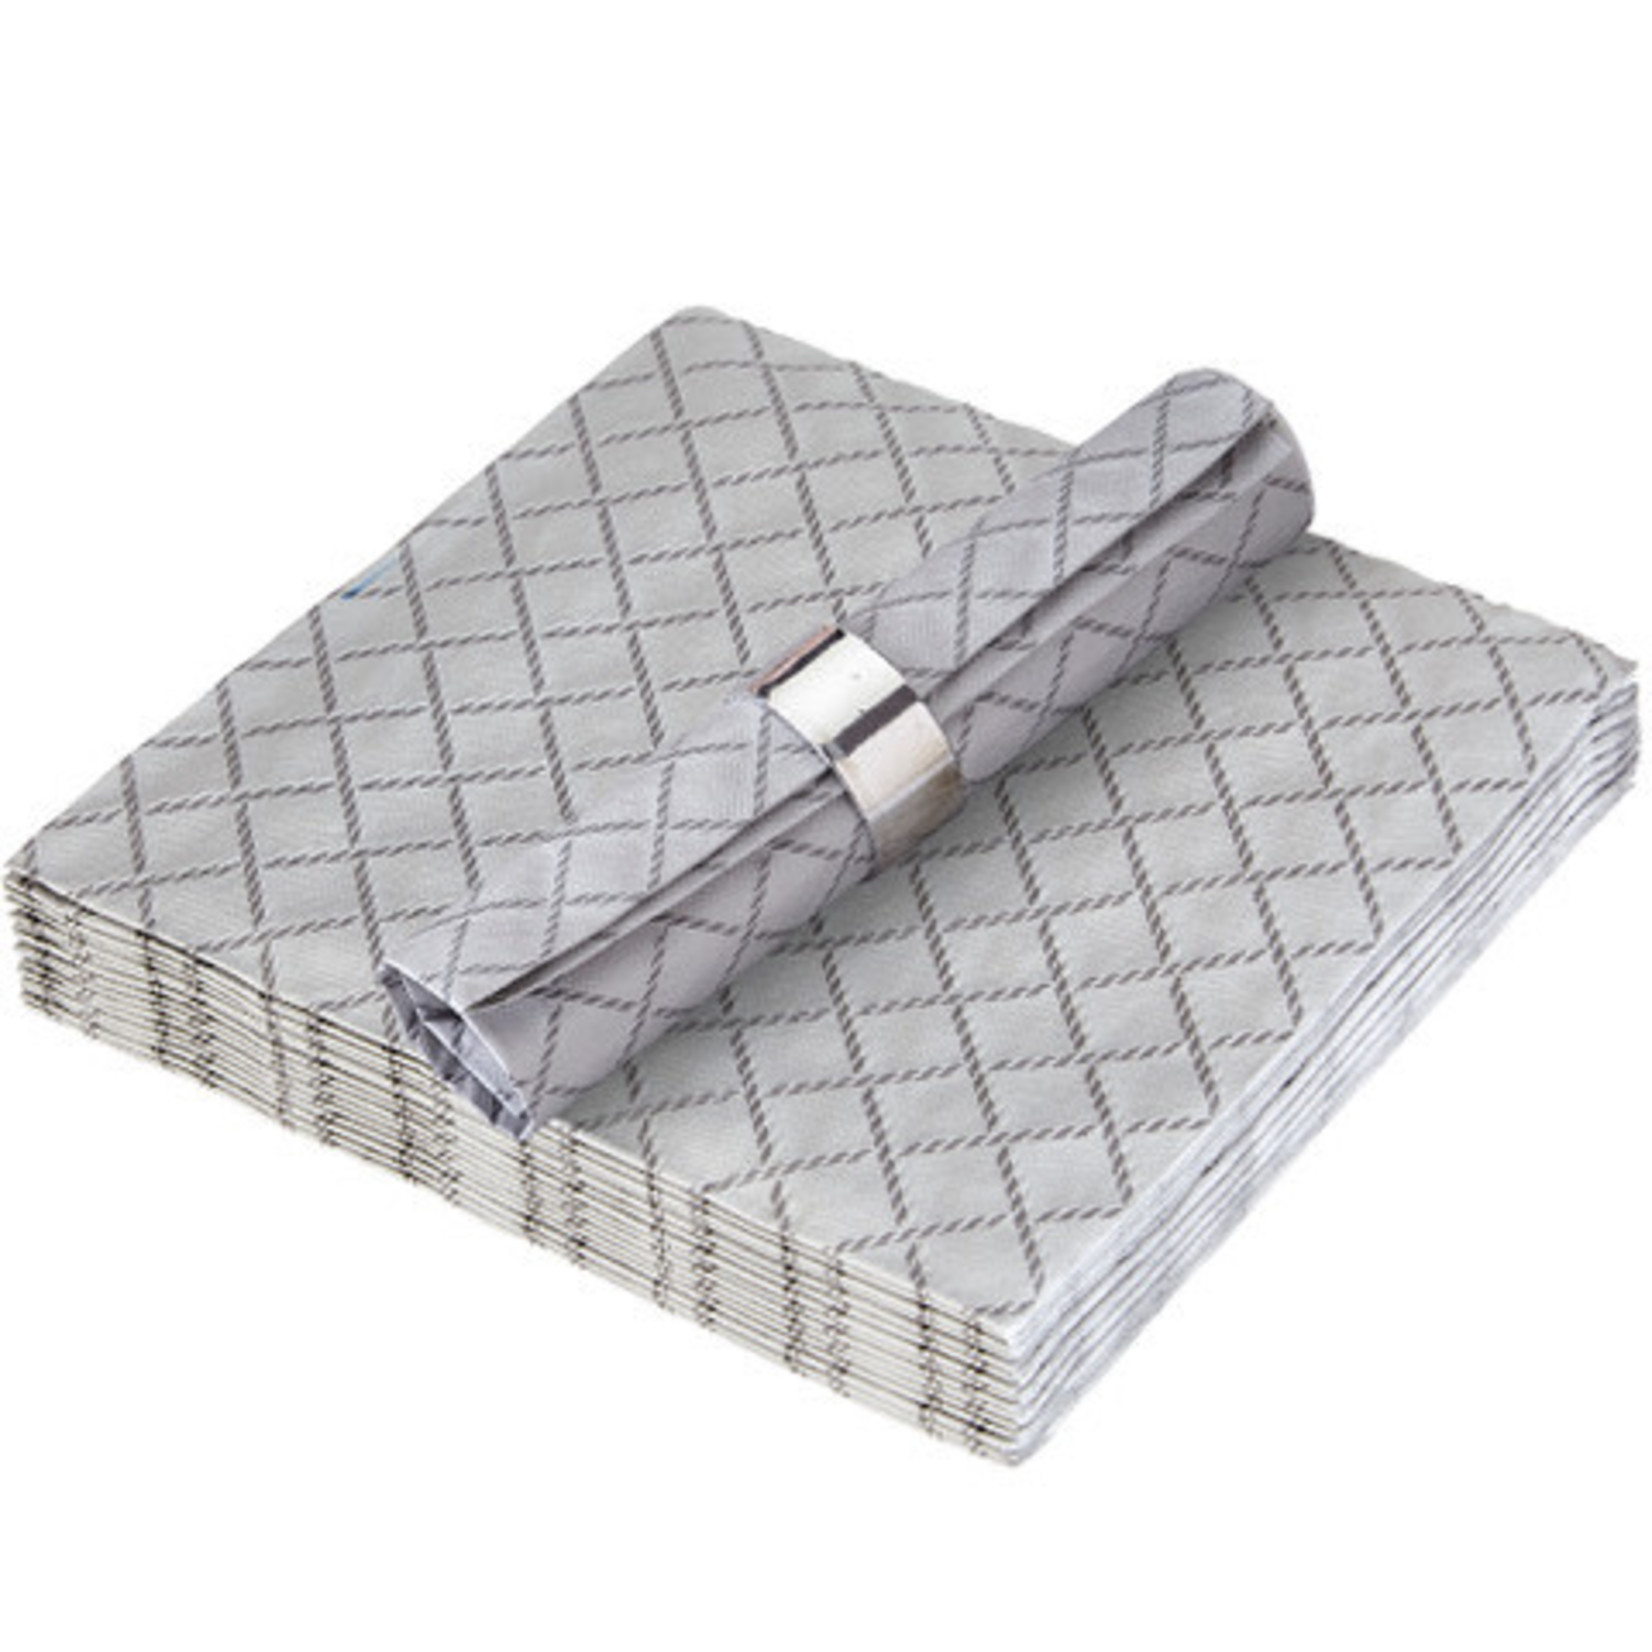 Silverspoons Quilted Silver, Cocktail Napkins - 16/Pack